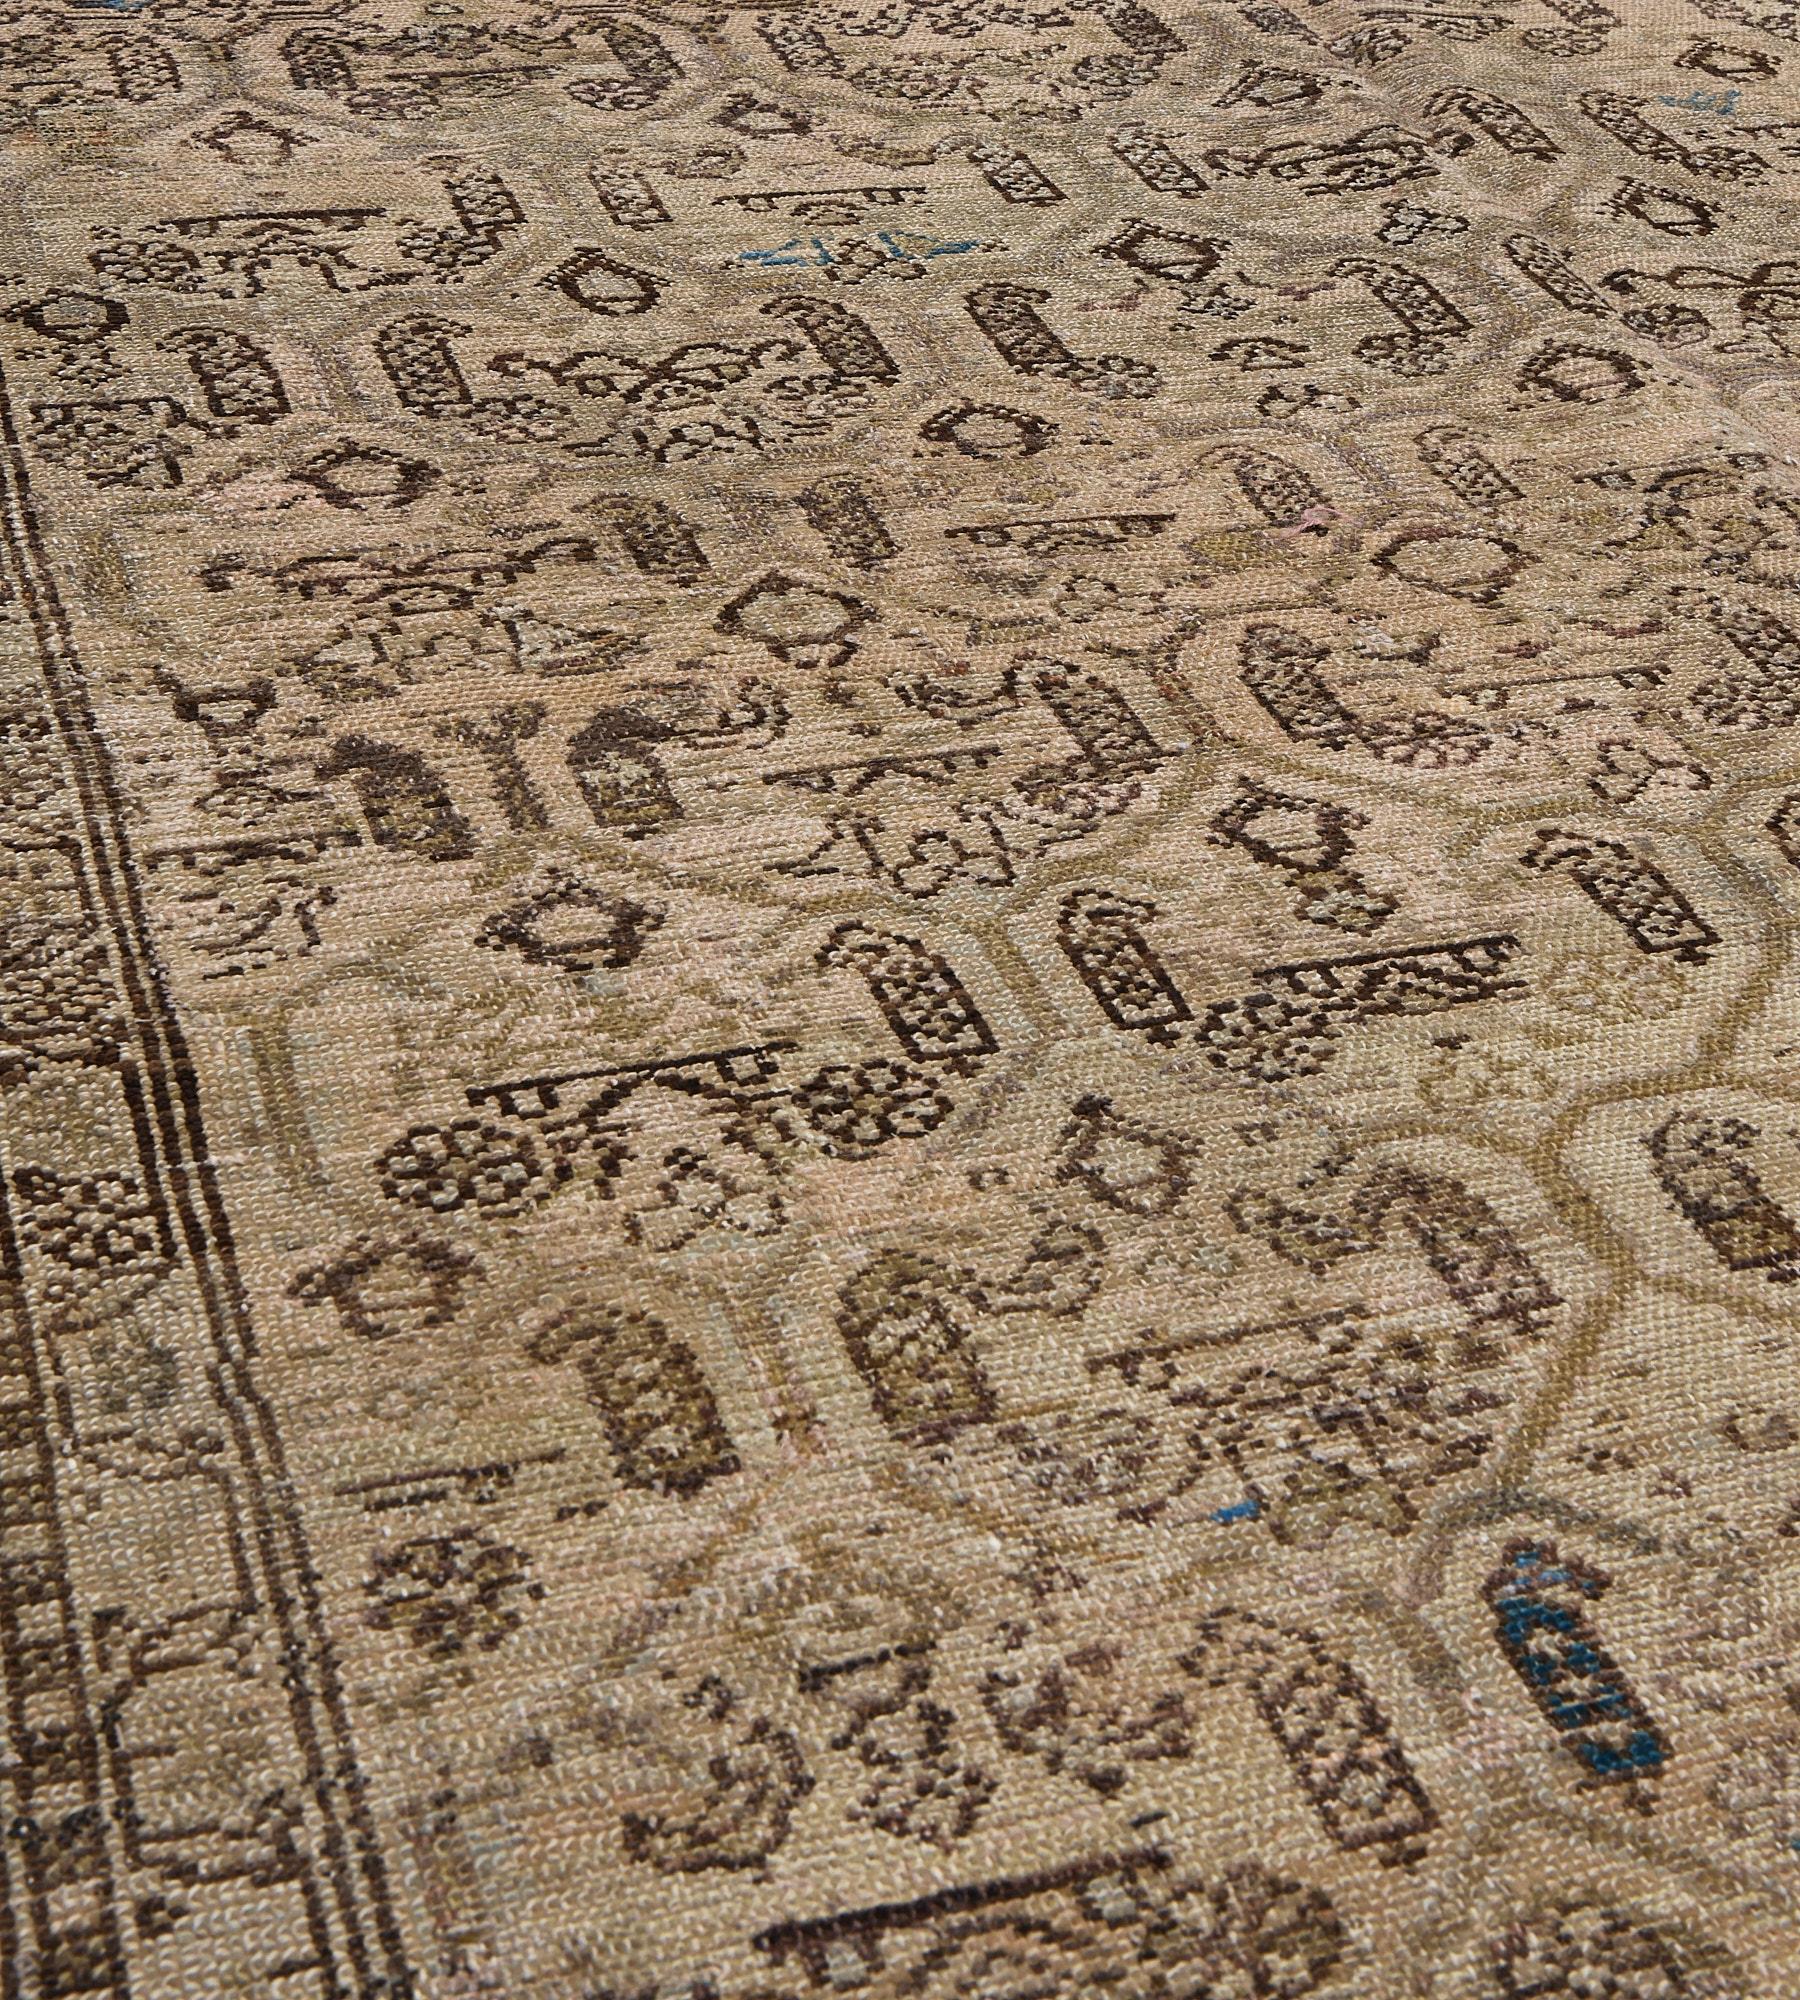 This antique Malayer rug has a buff-brown field with an overall design of diagonal rows light brown lozenges each containing a chocolate-brown central floral motif flanked by boteh and an angular flowerhead, in a triple striped buff-brown border